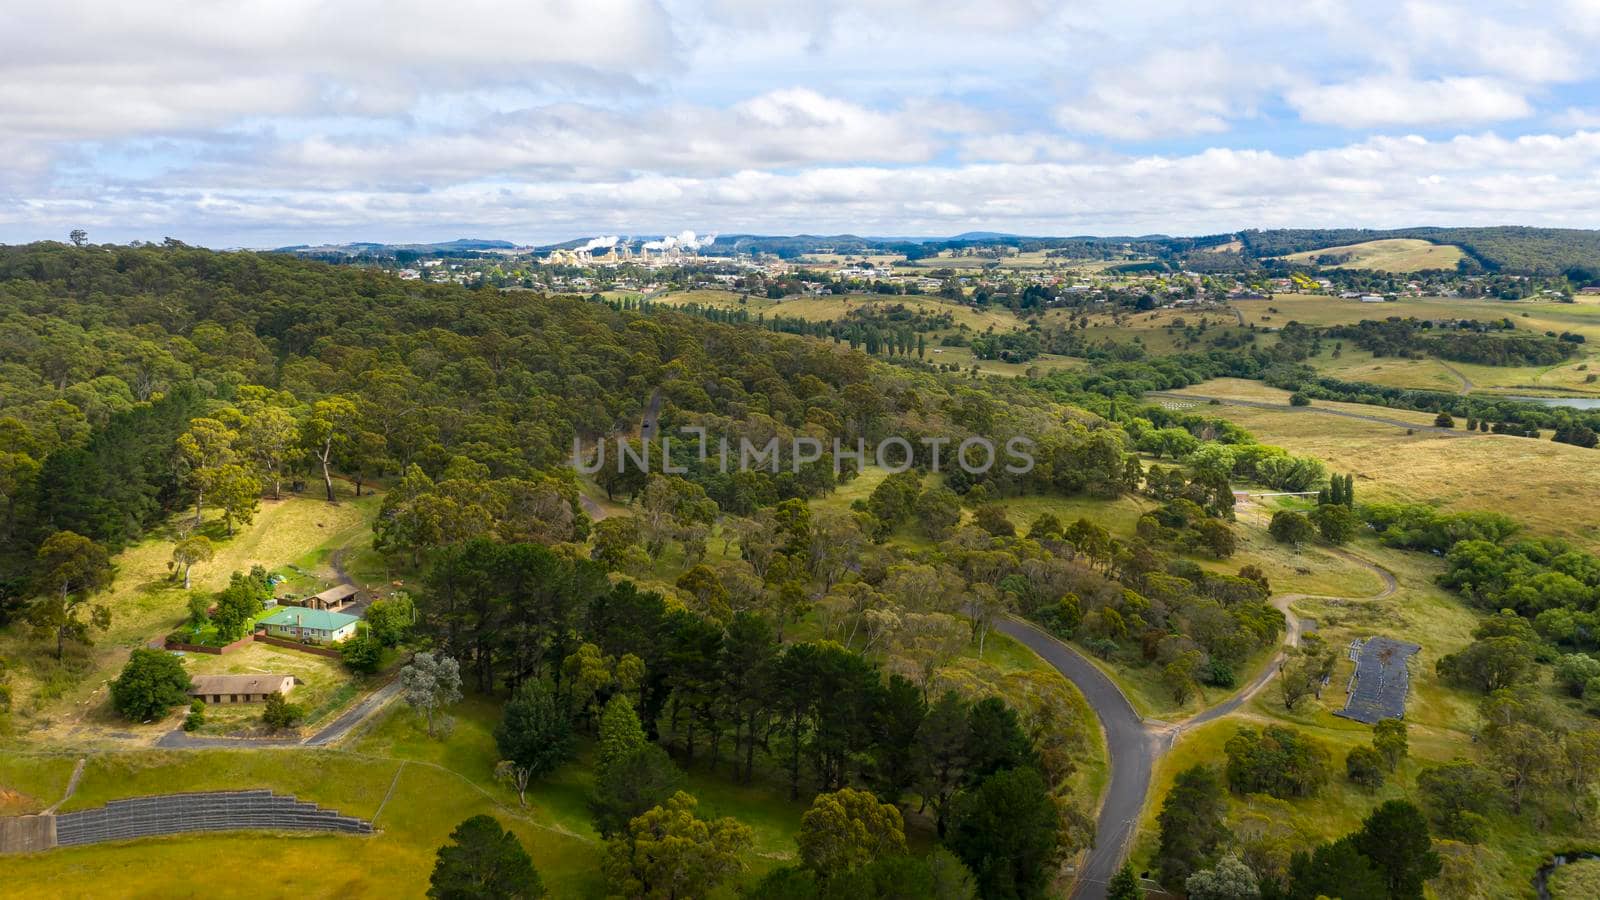 Aerial view of the township of Oberon in the Central Tablelands in regional New South Wales in Australia